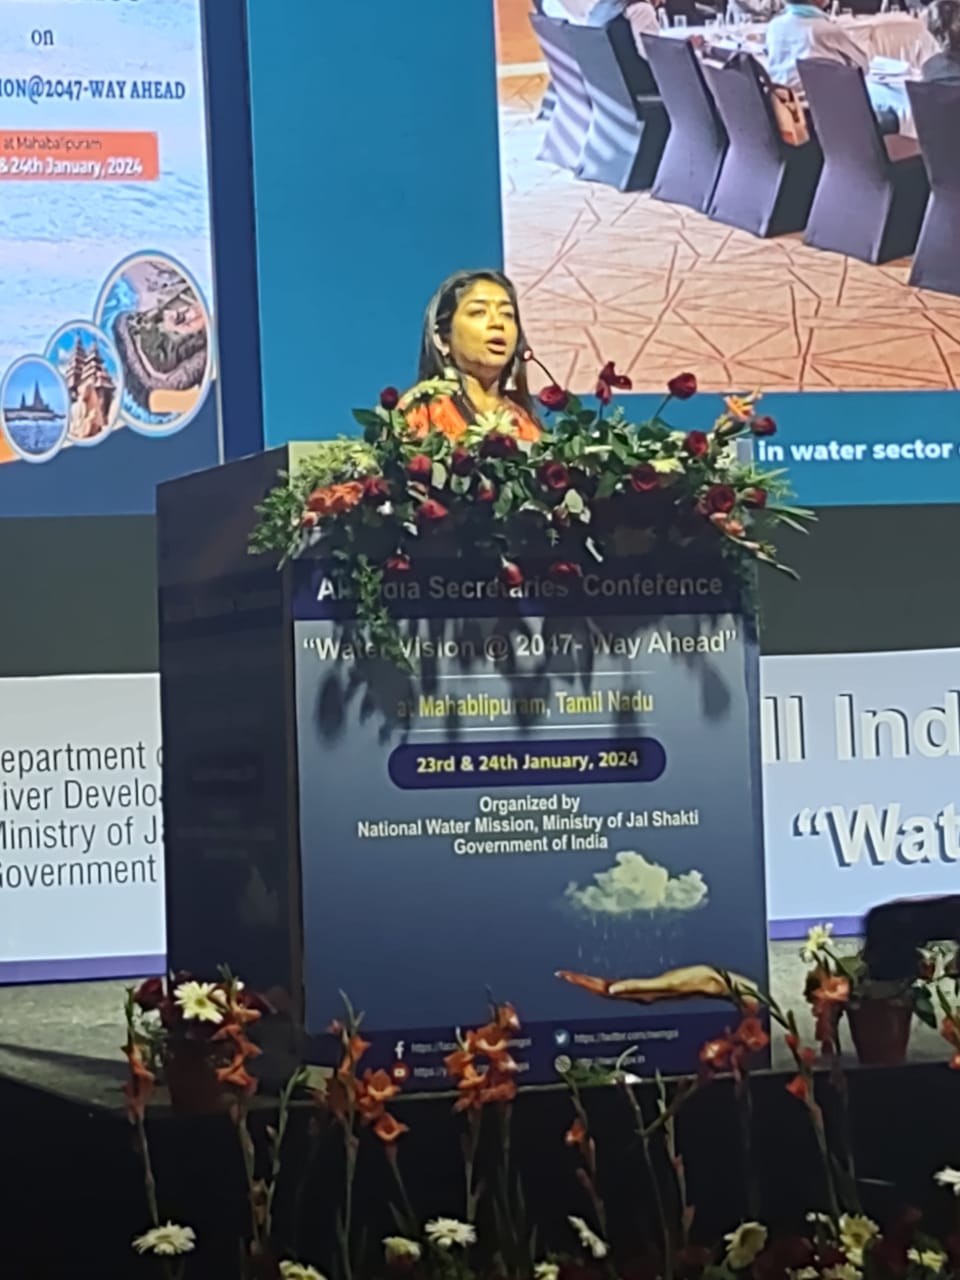 Two-day All India Secretaries’ Conference on ‘Water Vision @ 2047- Way Ahead’ concluded